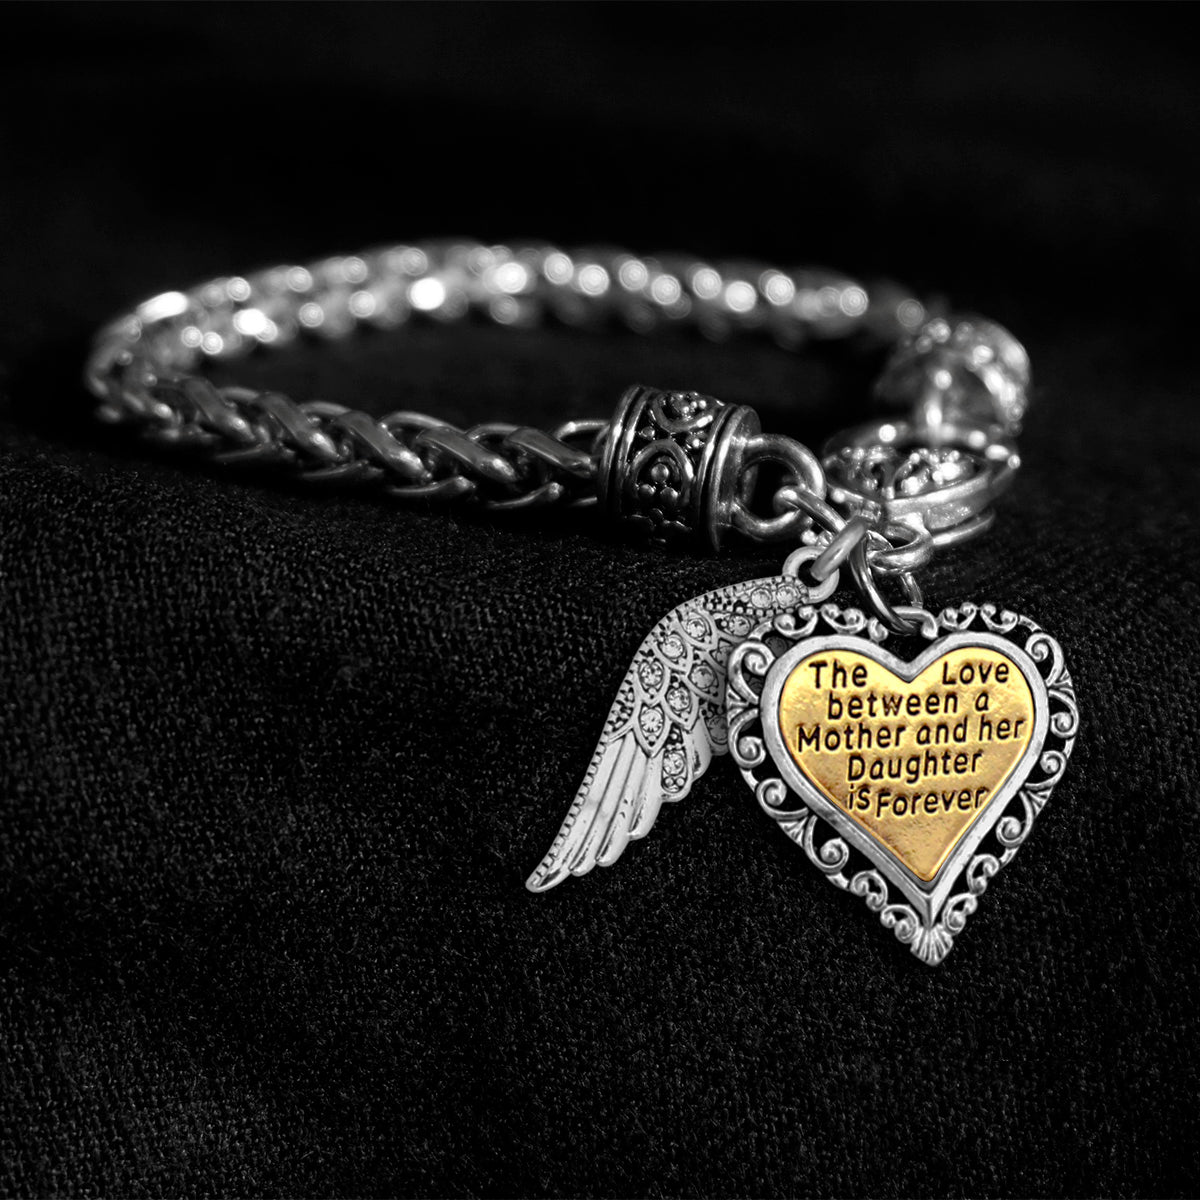 Love Between Mother And Daughter Crystal Wing Engraved Silver Braided Clasp Charm Bracelet